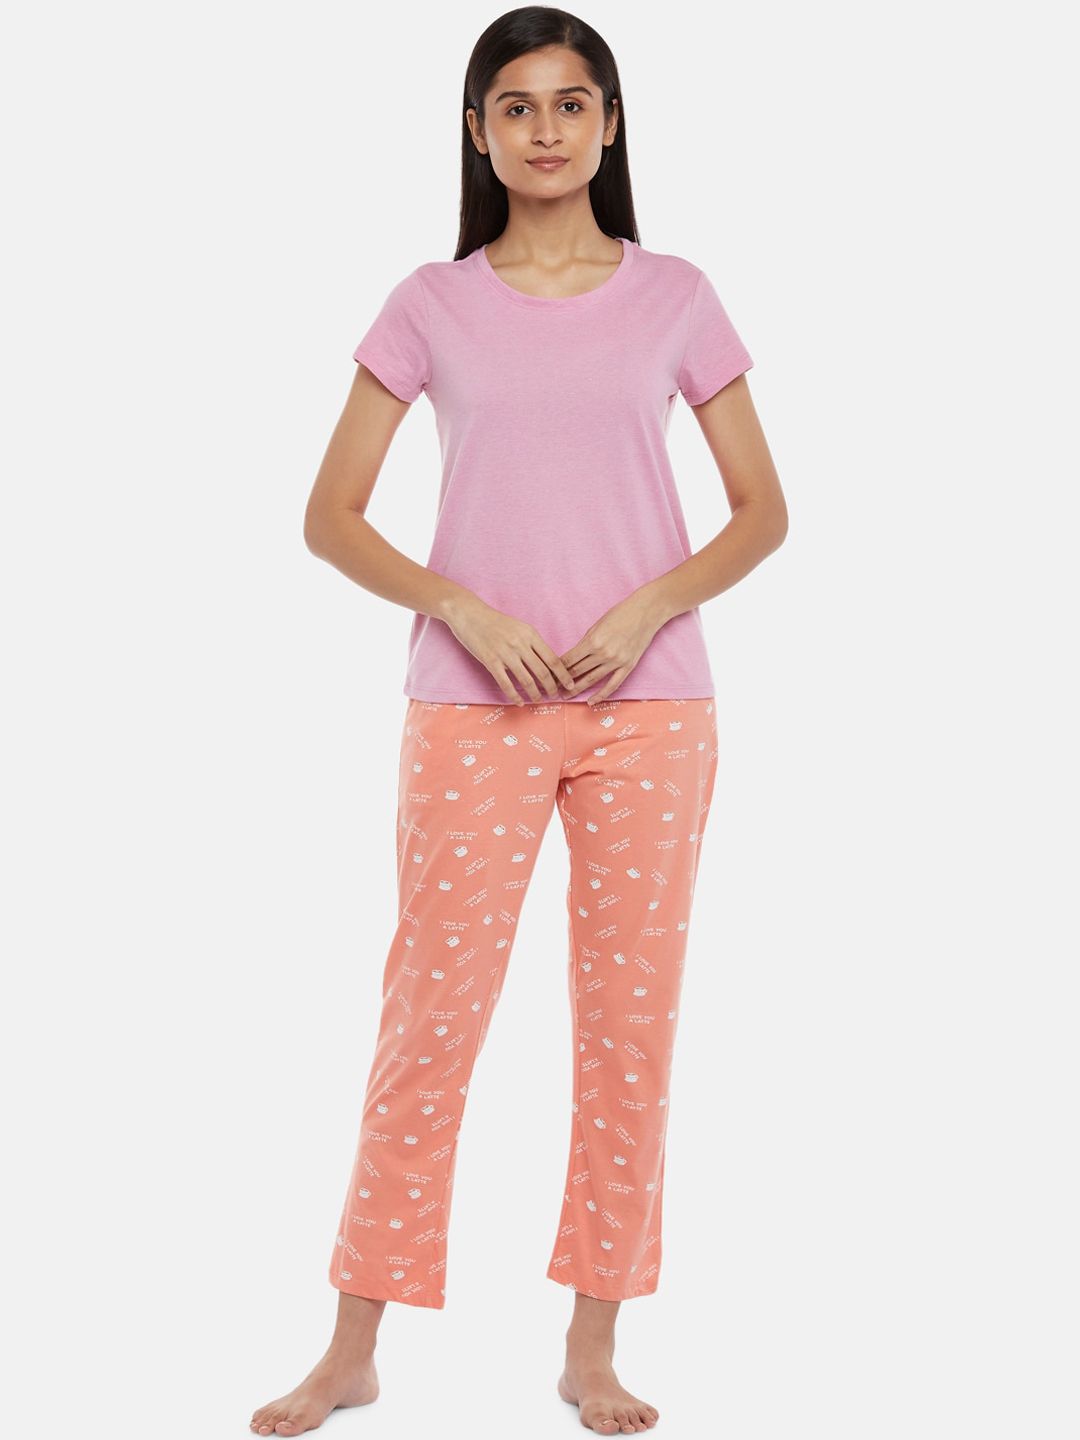 Dreamz by Pantaloons Women Coral & Pink Printed Night suit Price in India